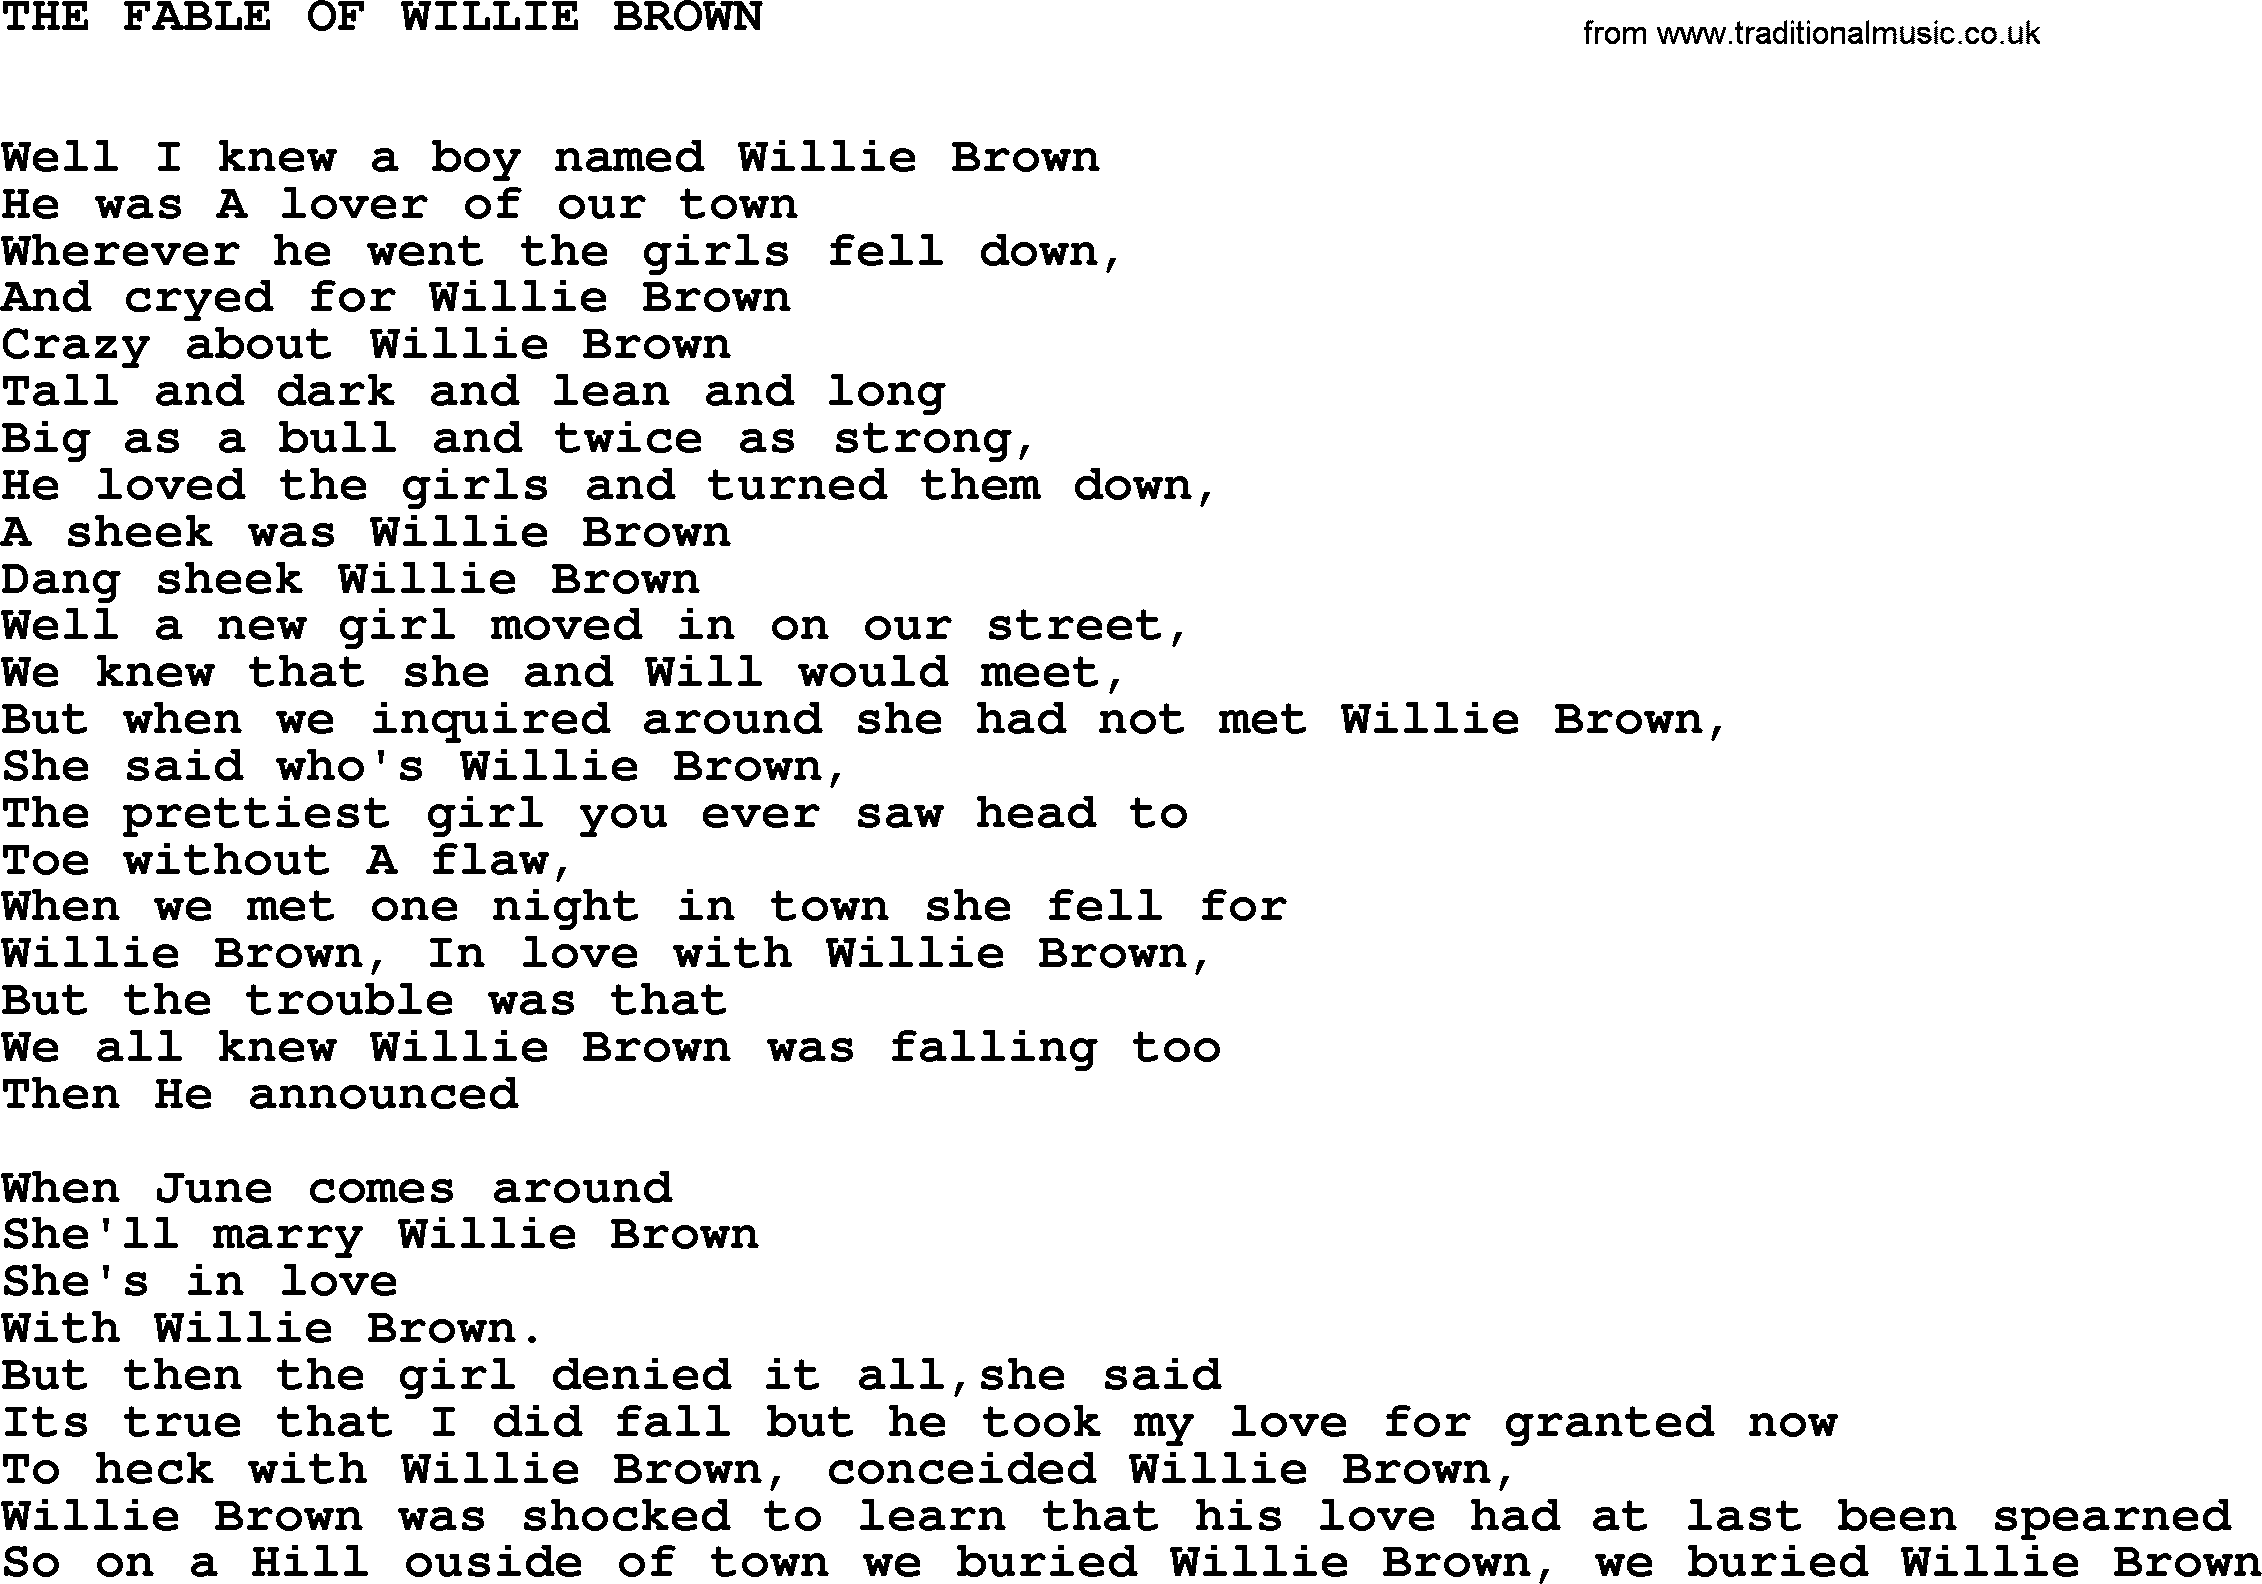 Johnny Cash song The Fable Of Willie Brown.txt lyrics